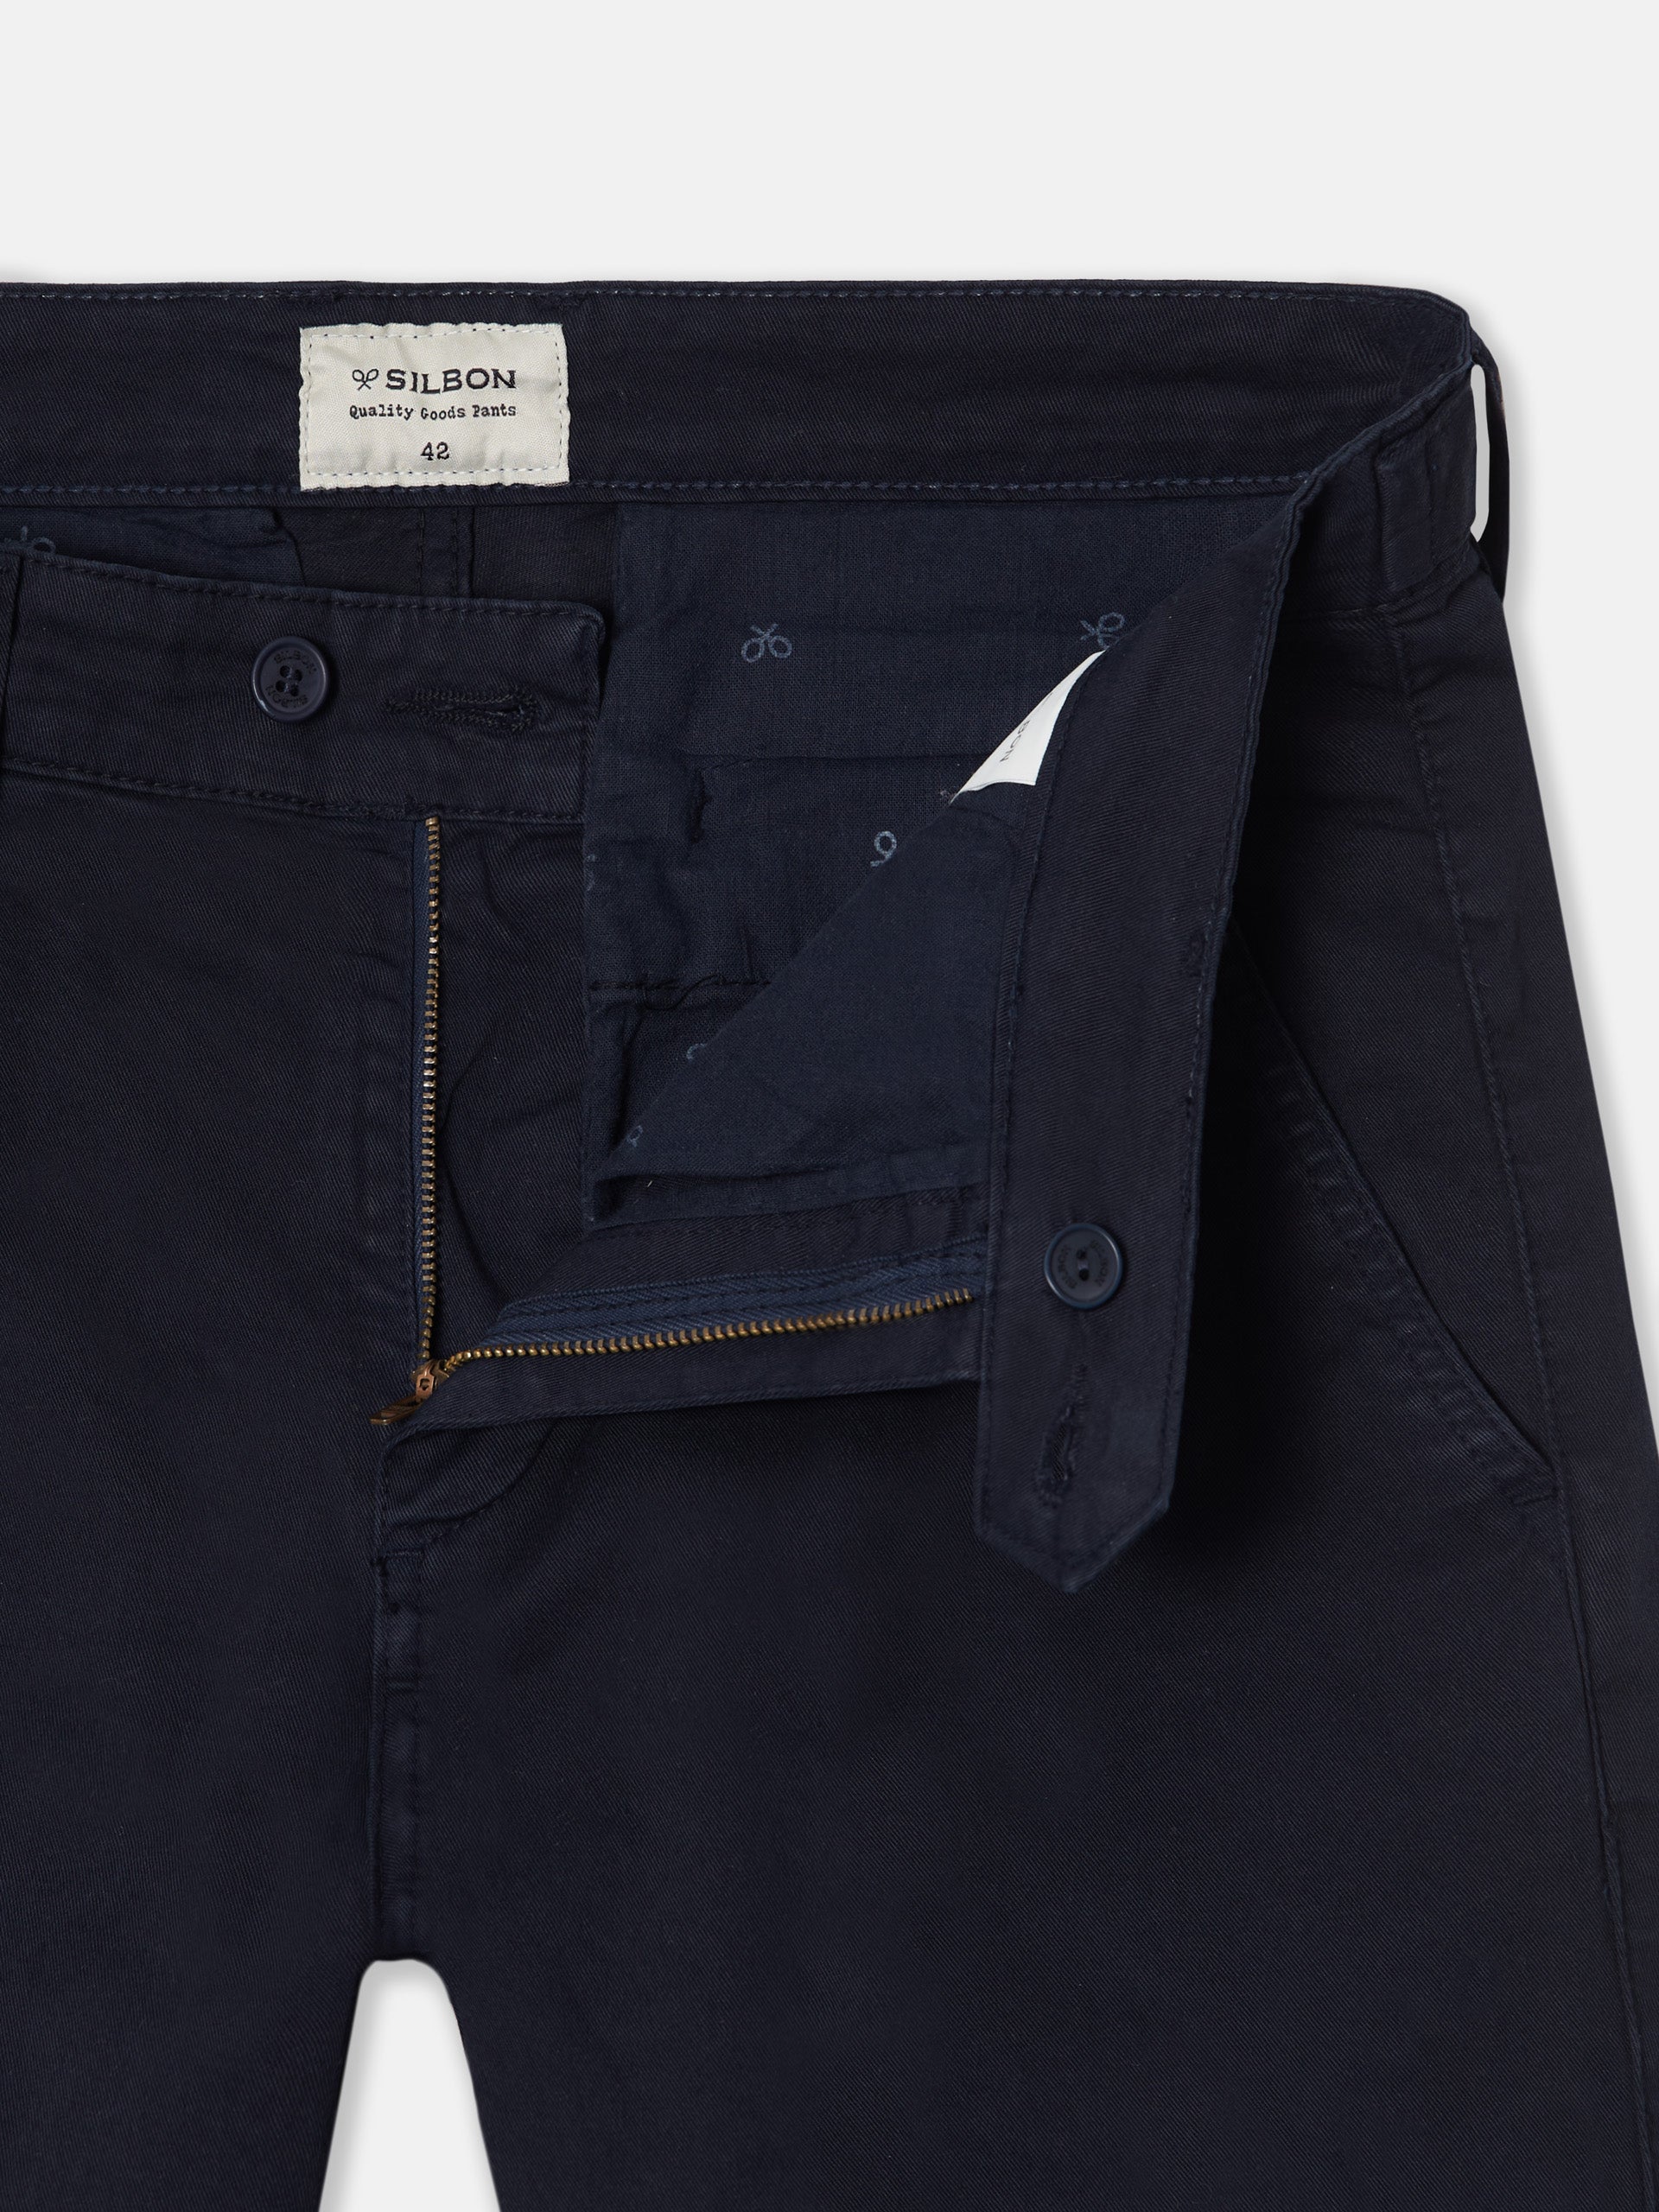 Navy blue pleated chino sport pants